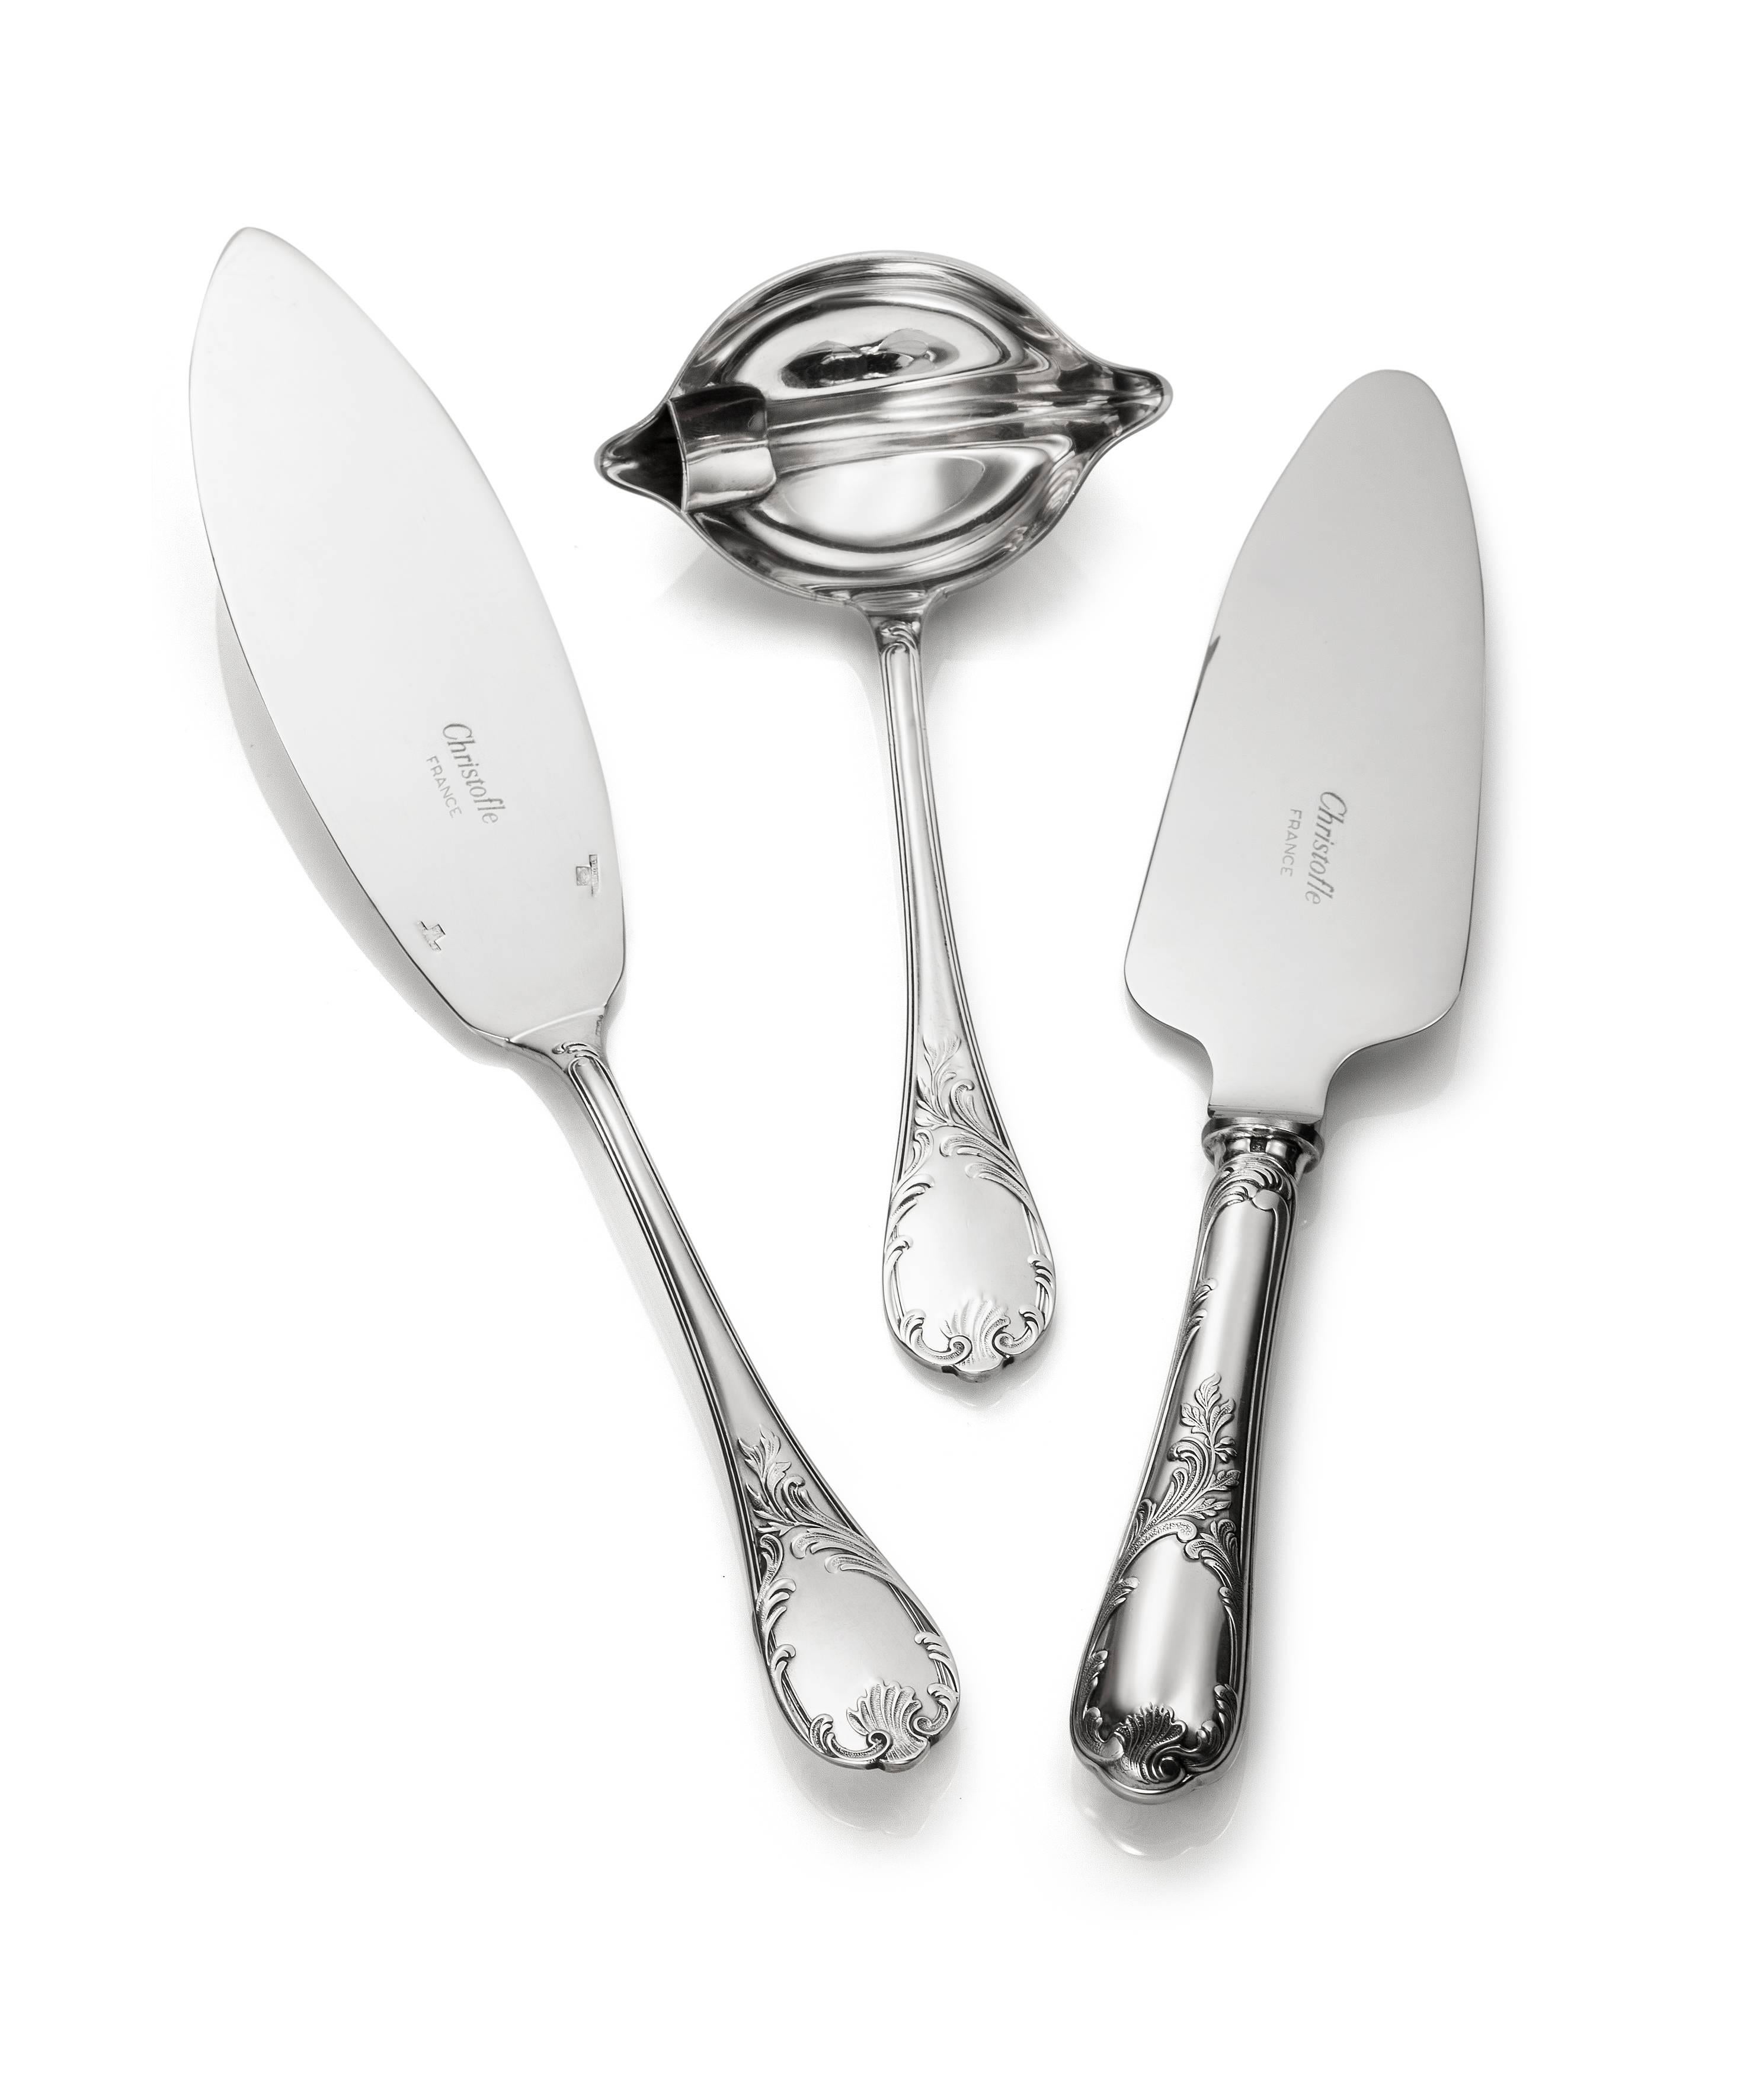 A very elegant 143 pieces French Christofle Marly silver plated flatware, in top conditions, comprising:

12 dinner knives
12 dinner forks
12 dinner spoons
12 dessert knives
12 dessert forks
12 dessert spoons
12 fish knives
12 fish